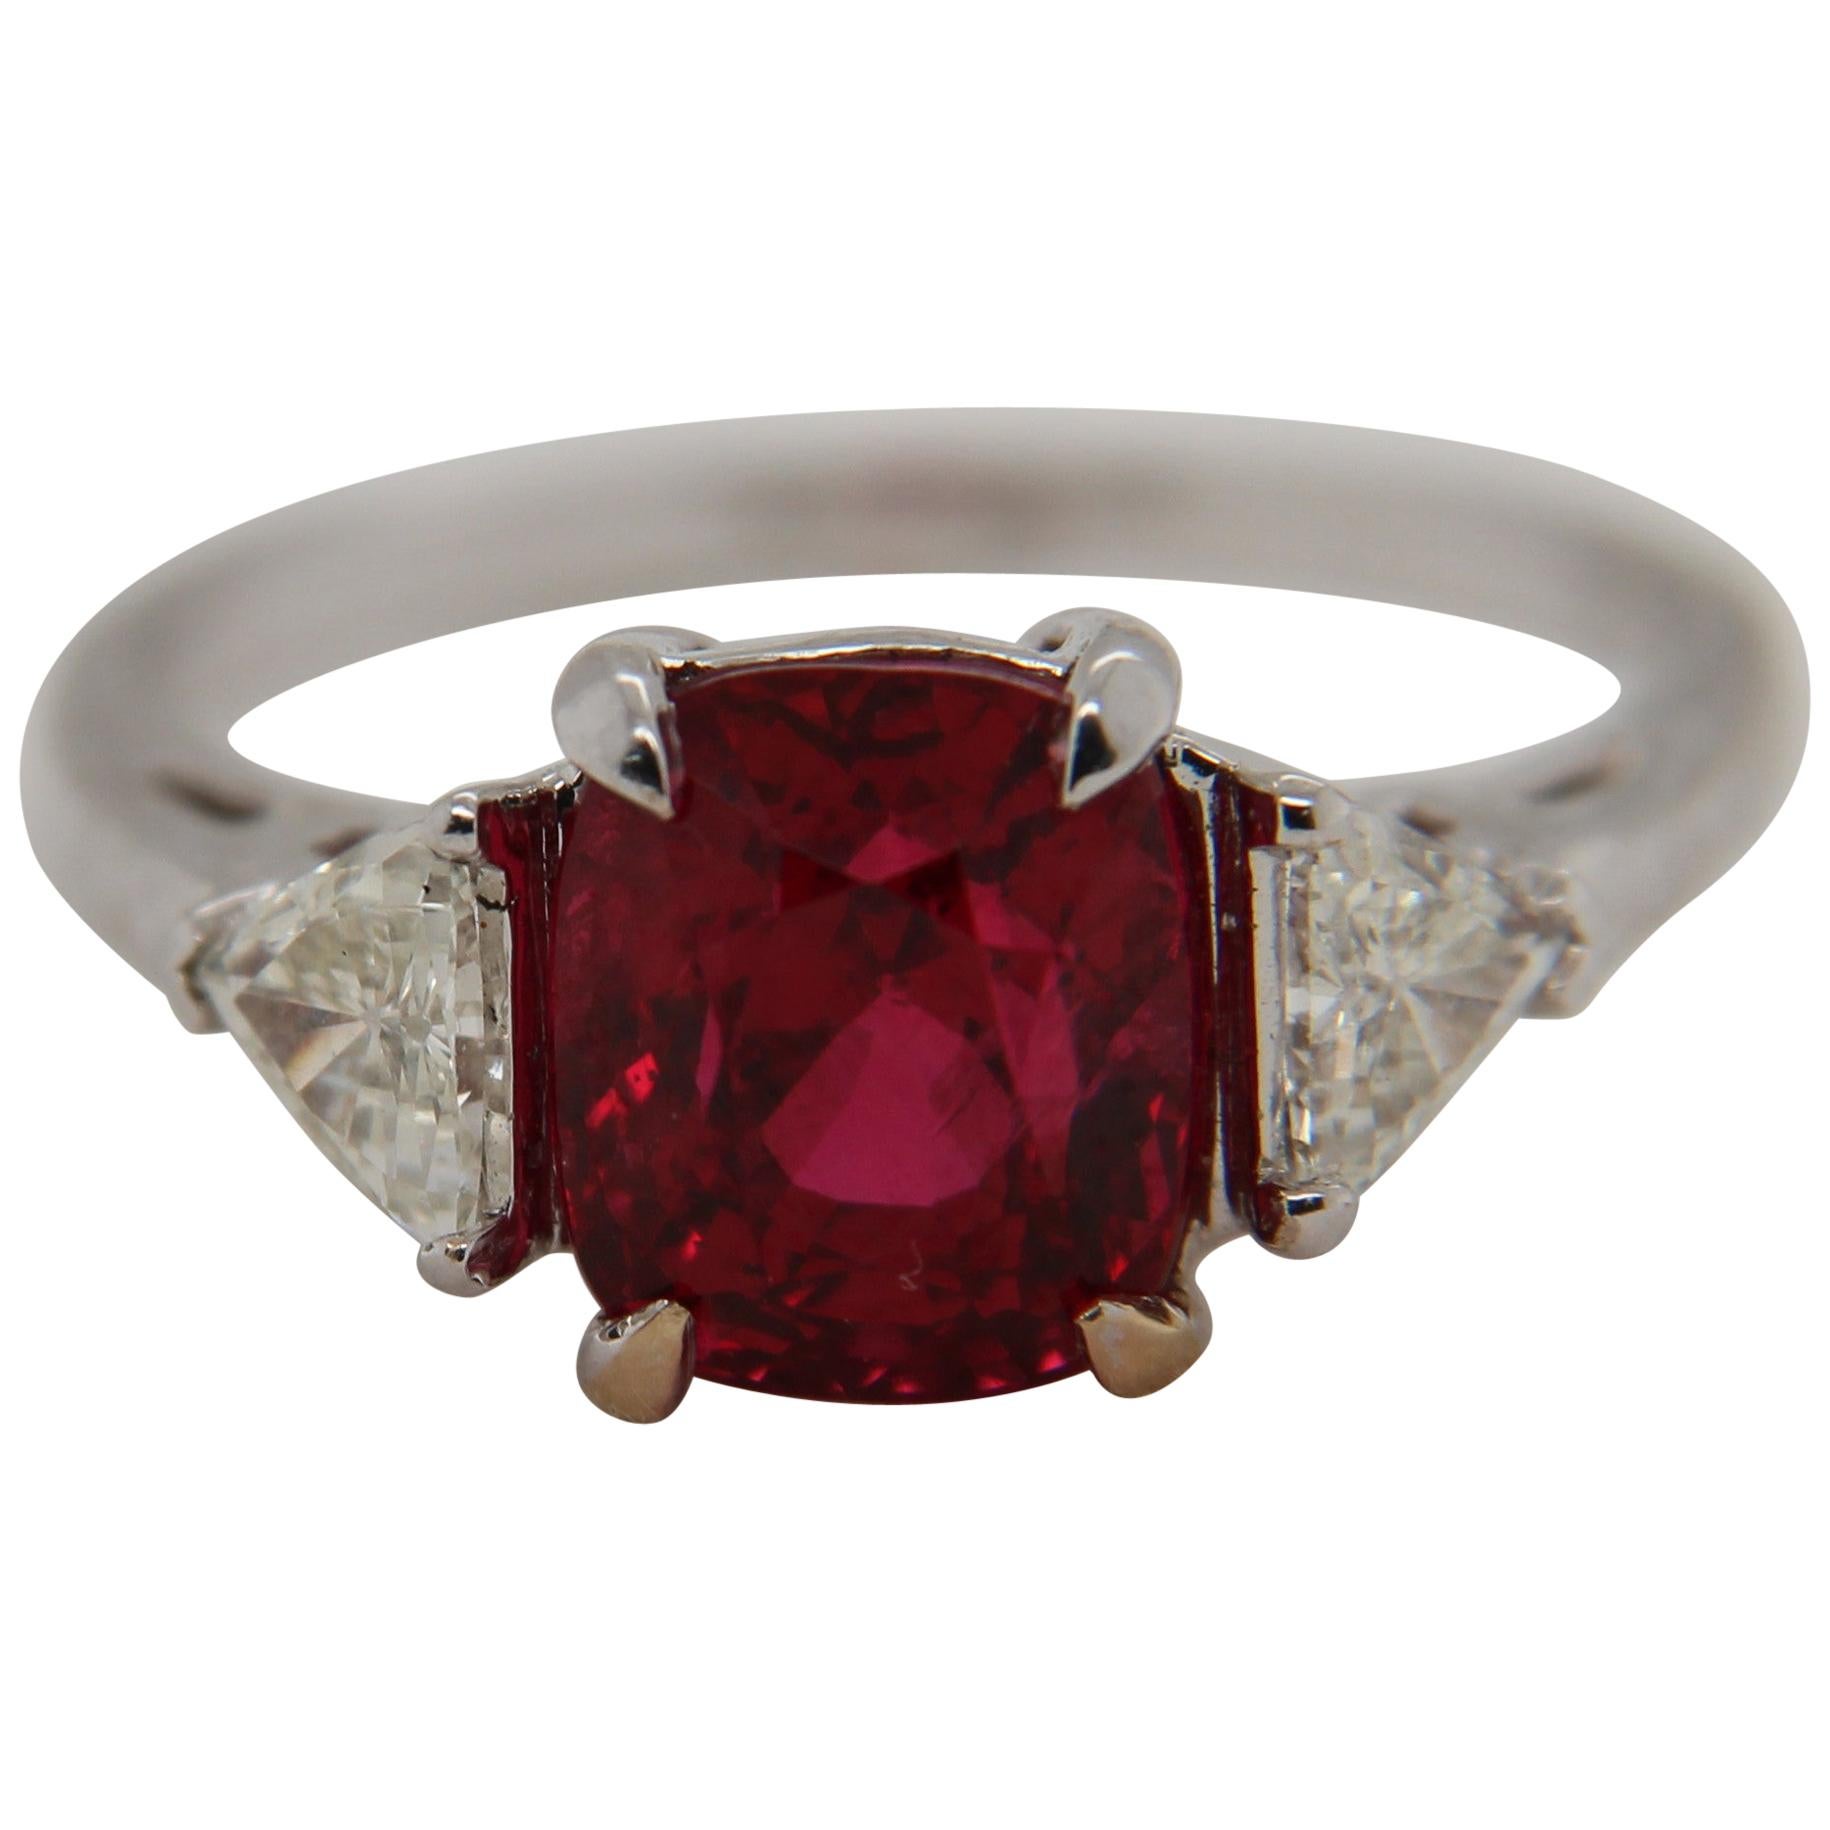 GRS Certified 3.04 Carat Burmese Spinel and Diamond Ring